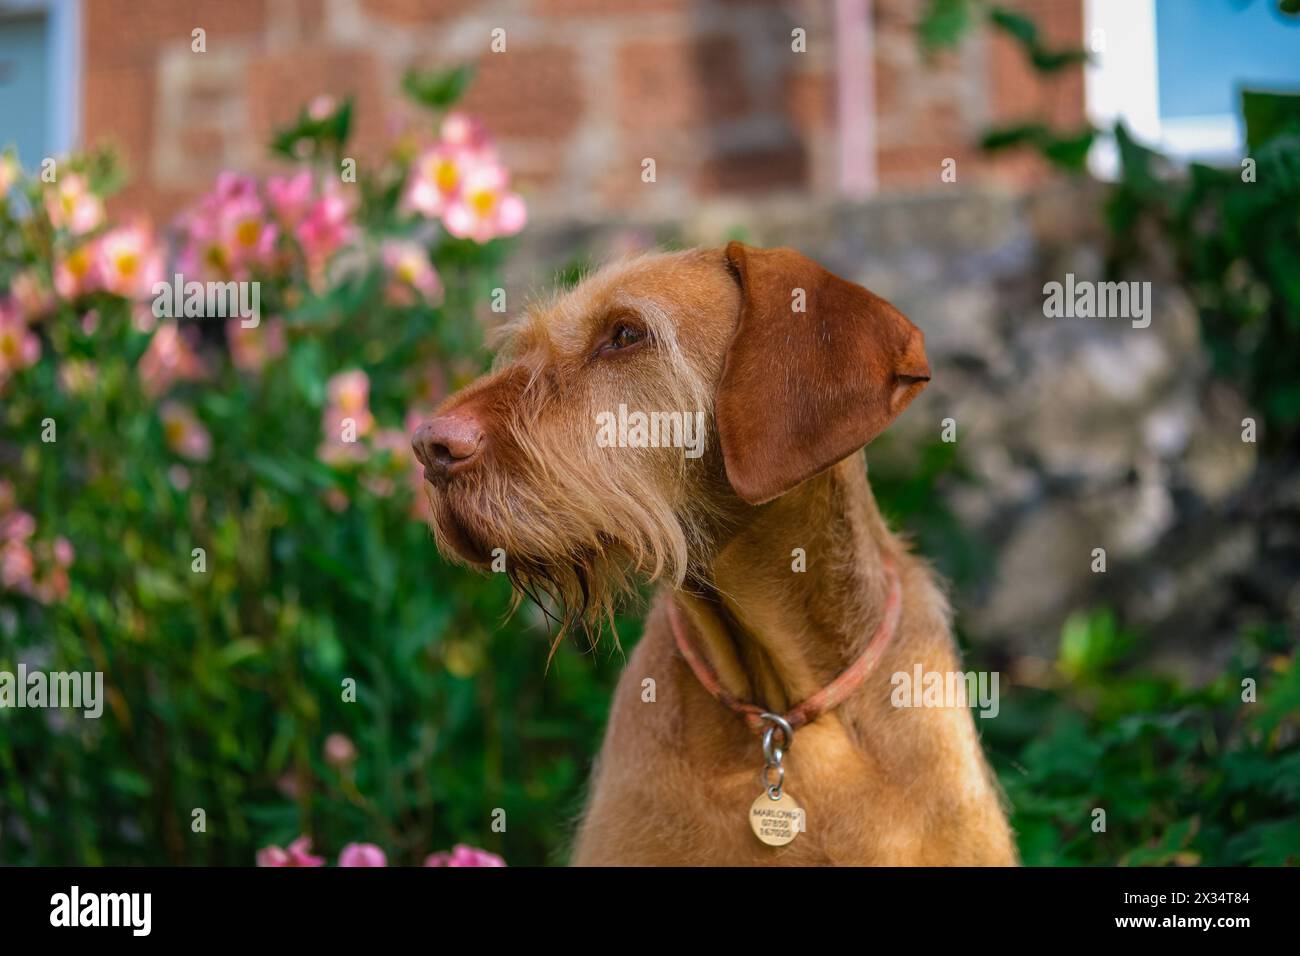 Basking in the beauty of the garden, this wirehaired vizsla finds joy among the blooms. Orange dog surrounded with flowers Stock Photo